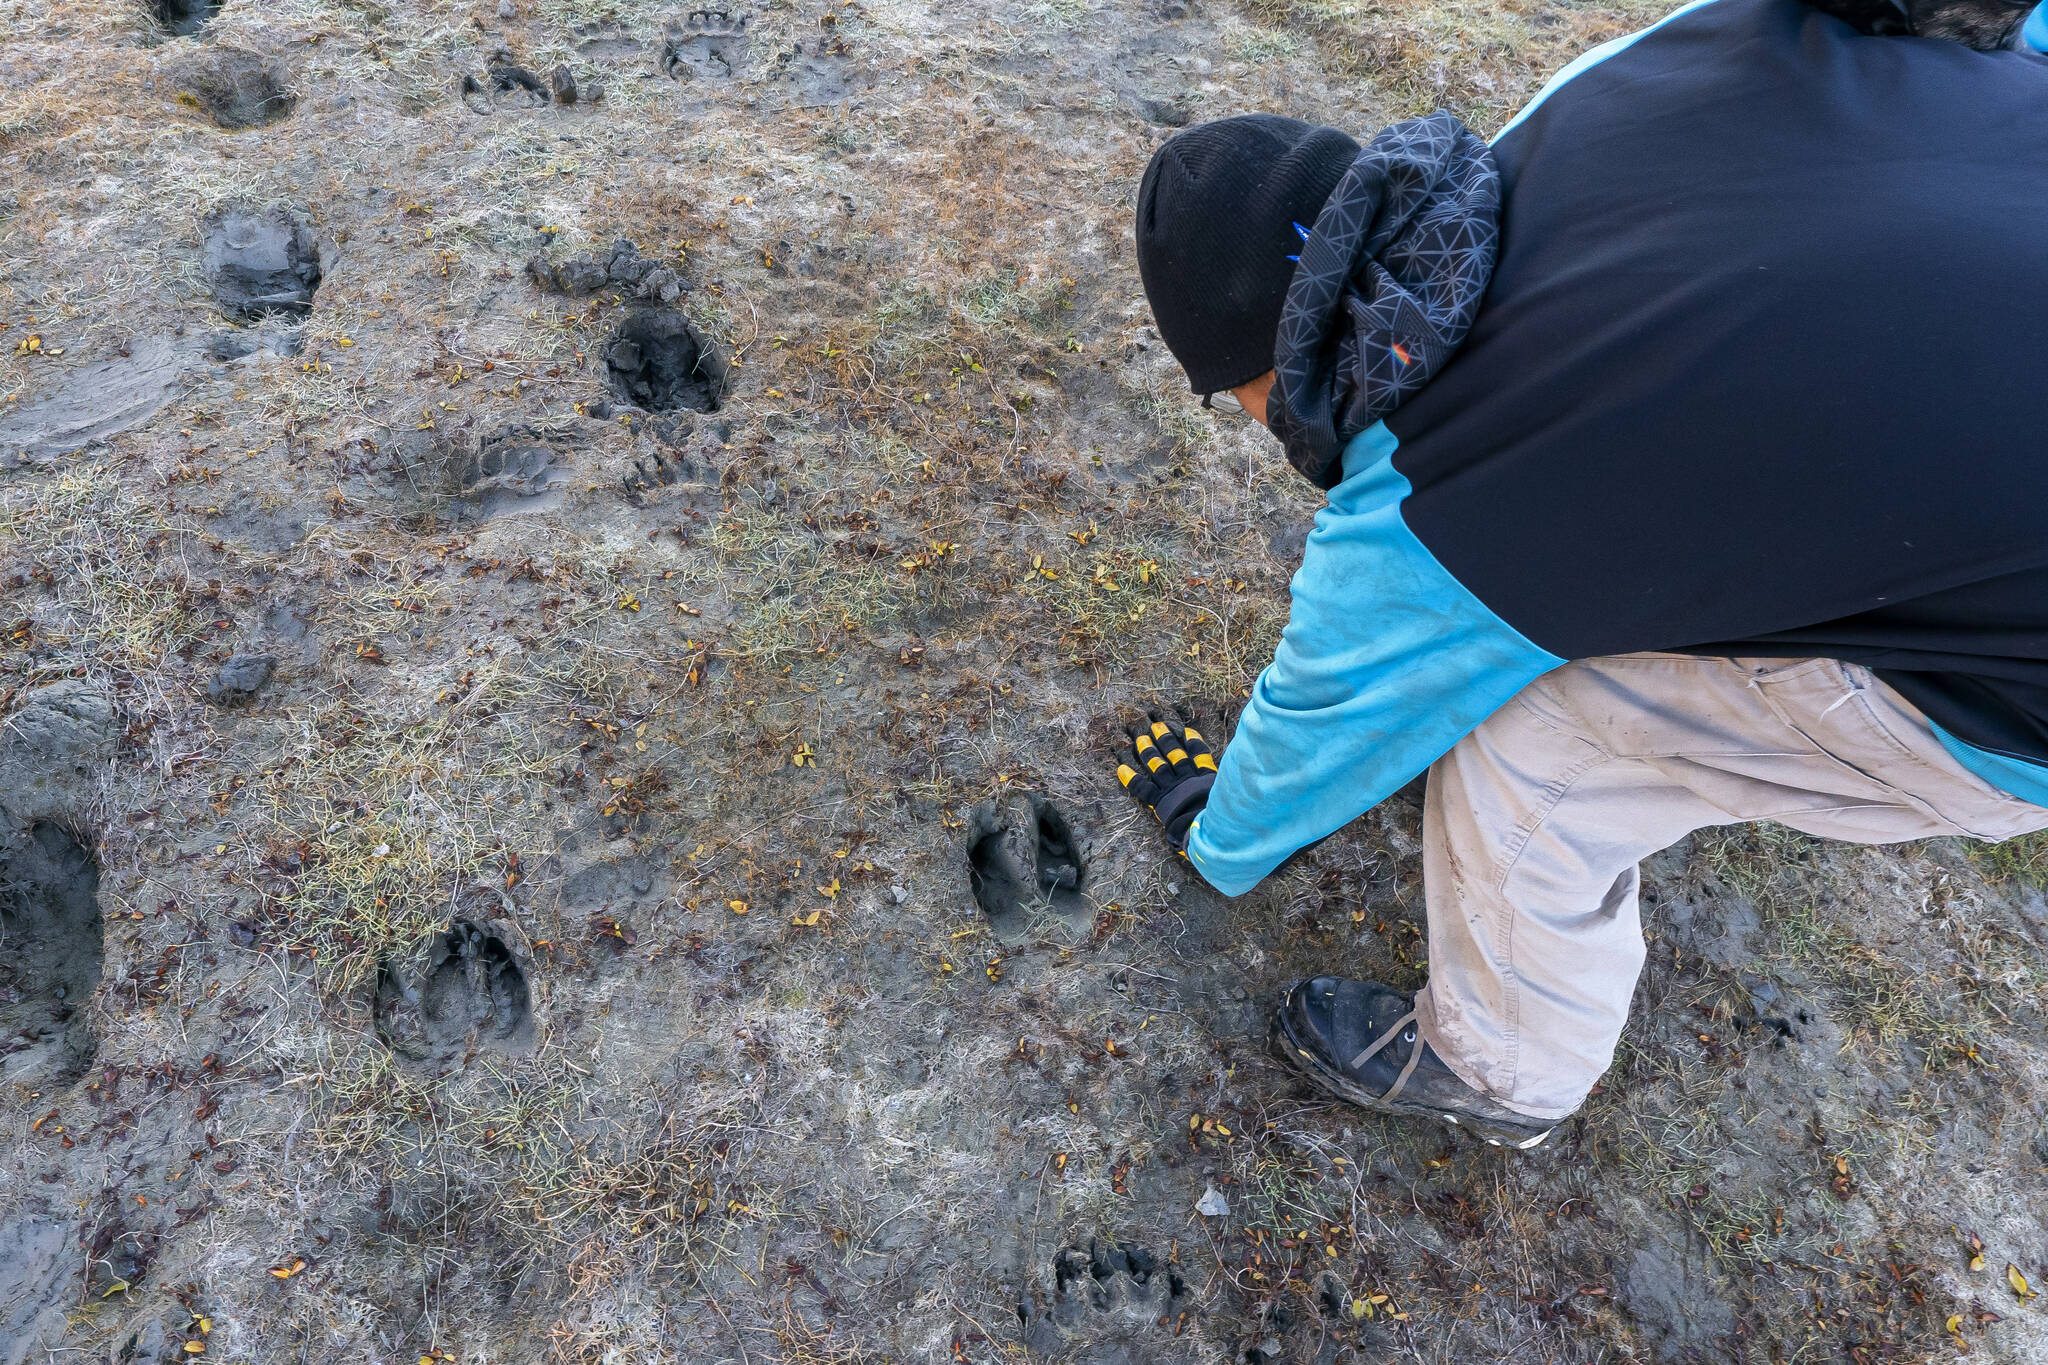 Michael Williams uses his hand to measure bear and moose tracks on Thursday, Sept. 16, 2021, near Stevens Village, Alaska. For the first time in memory, both king and chum salmon have dwindled to almost nothing and the state has banned salmon fishing on the Yukon. The remote communities that dot the river and live off its bounty are desperate and doubling down on moose and caribou hunts in the waning days of fall. (AP Photo/Nathan Howard)